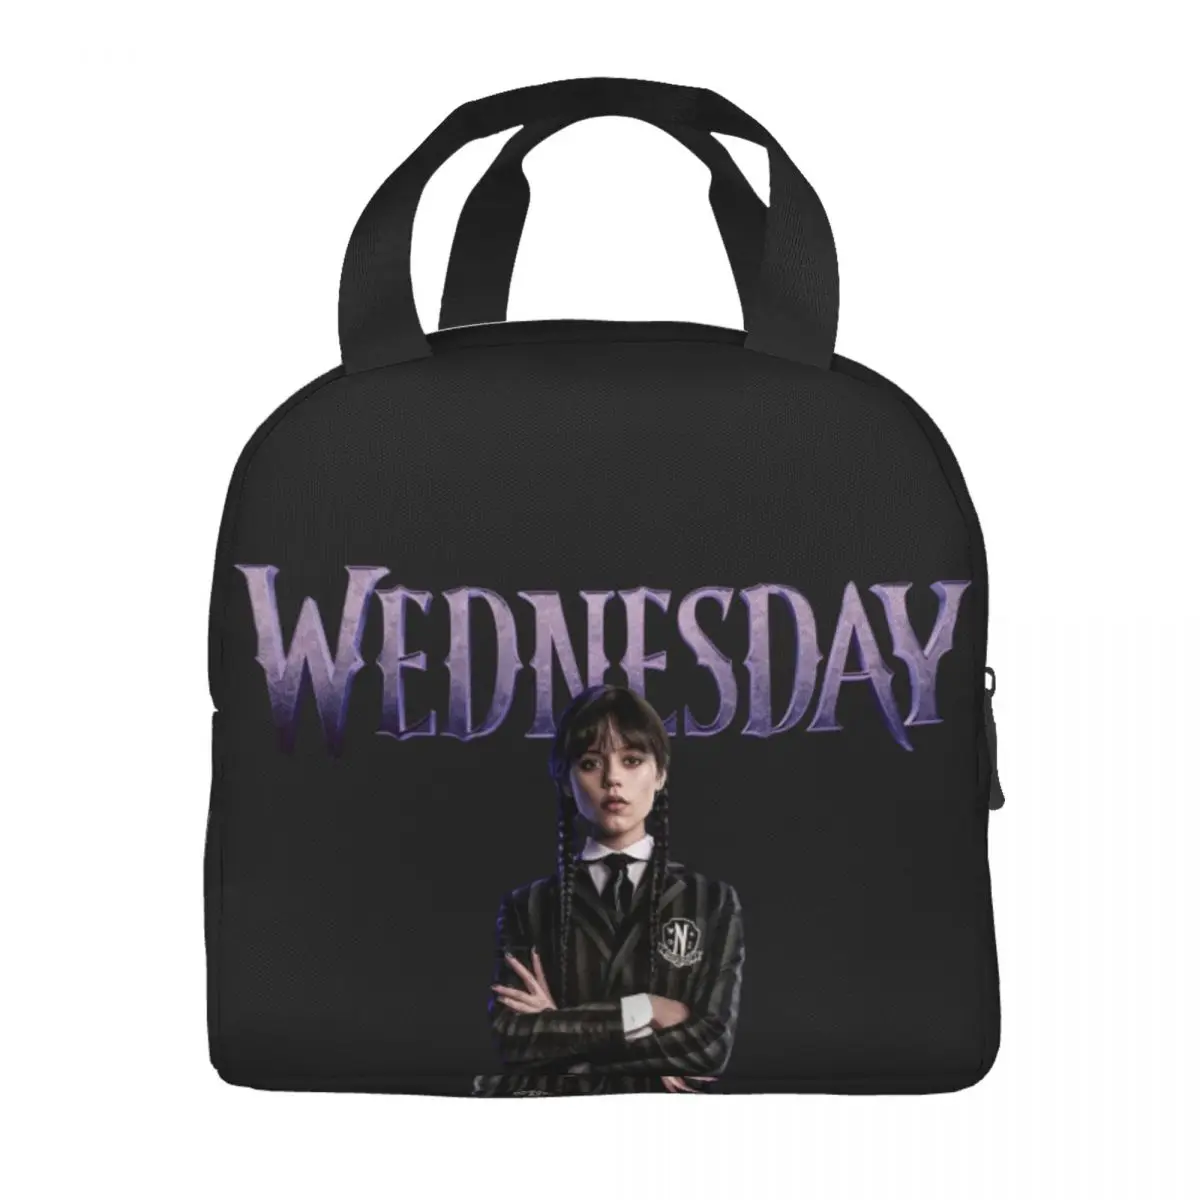 

Lunch Bag Wednesday Addams Thermal Insulated Cooler Bag Portable Picnic Wednesday Outfits Jenna Ortega Oxford Tote Bento Pouch